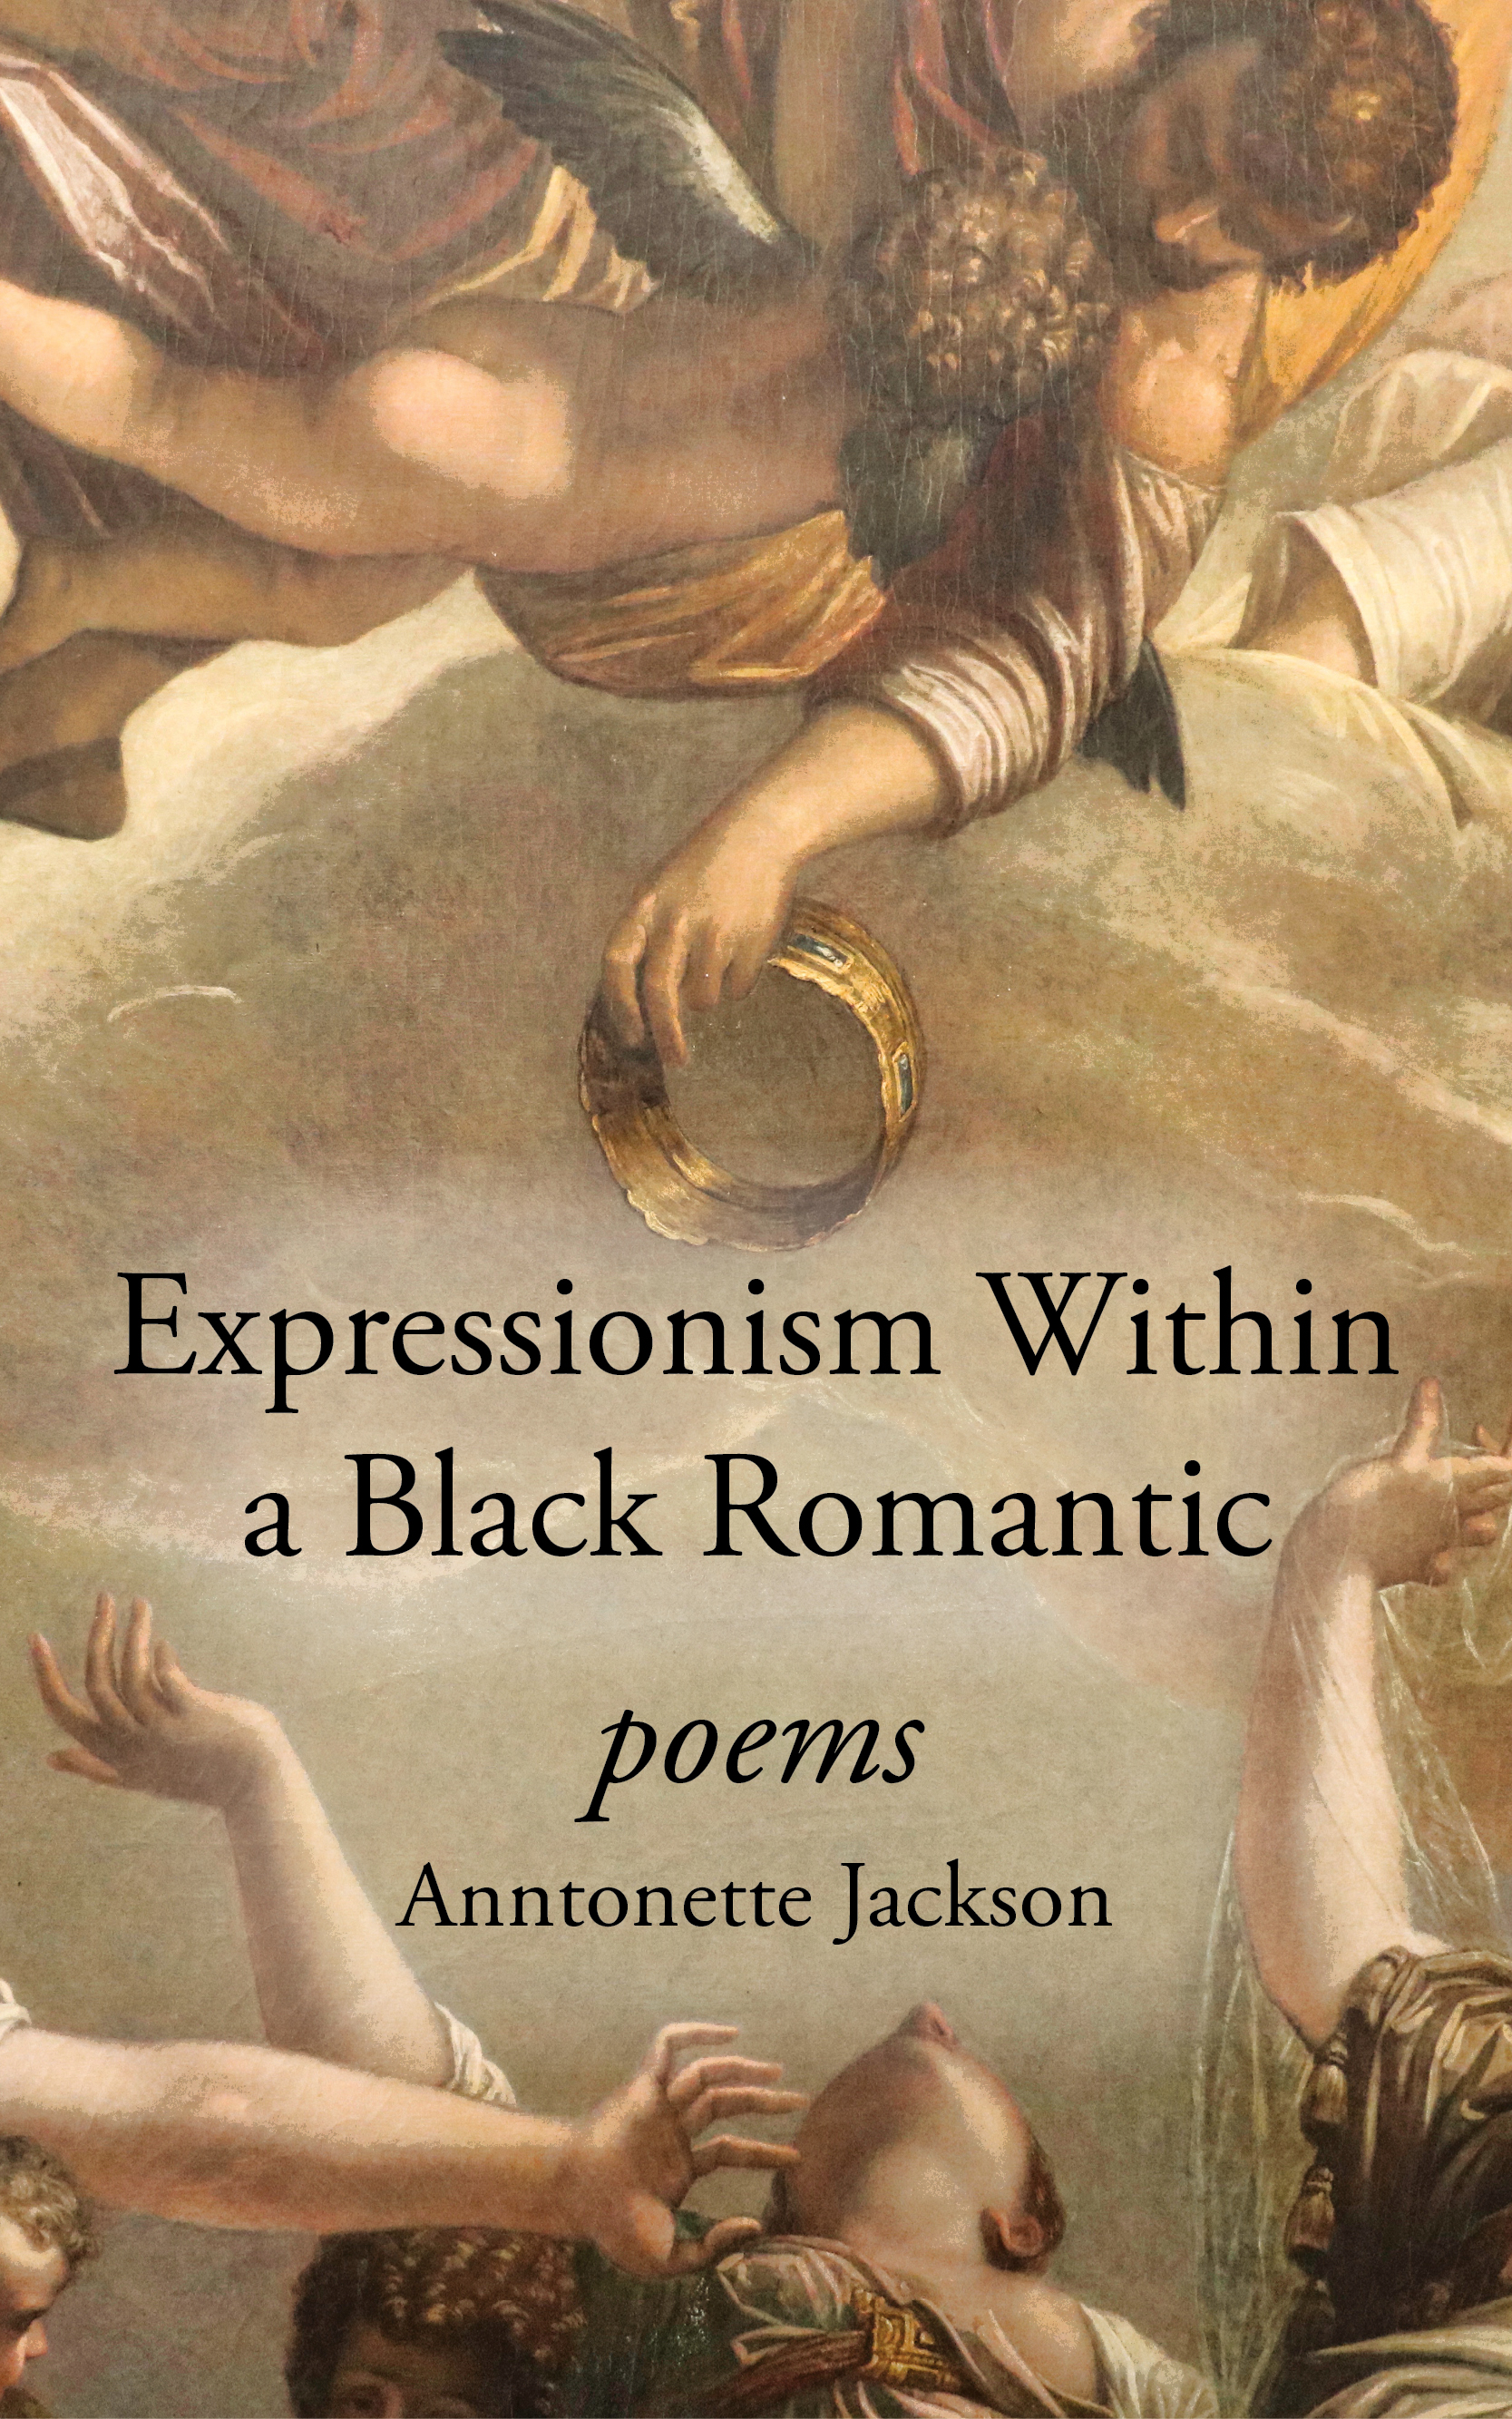 Expressions Within a Black Romantic by Anntonette Jackson